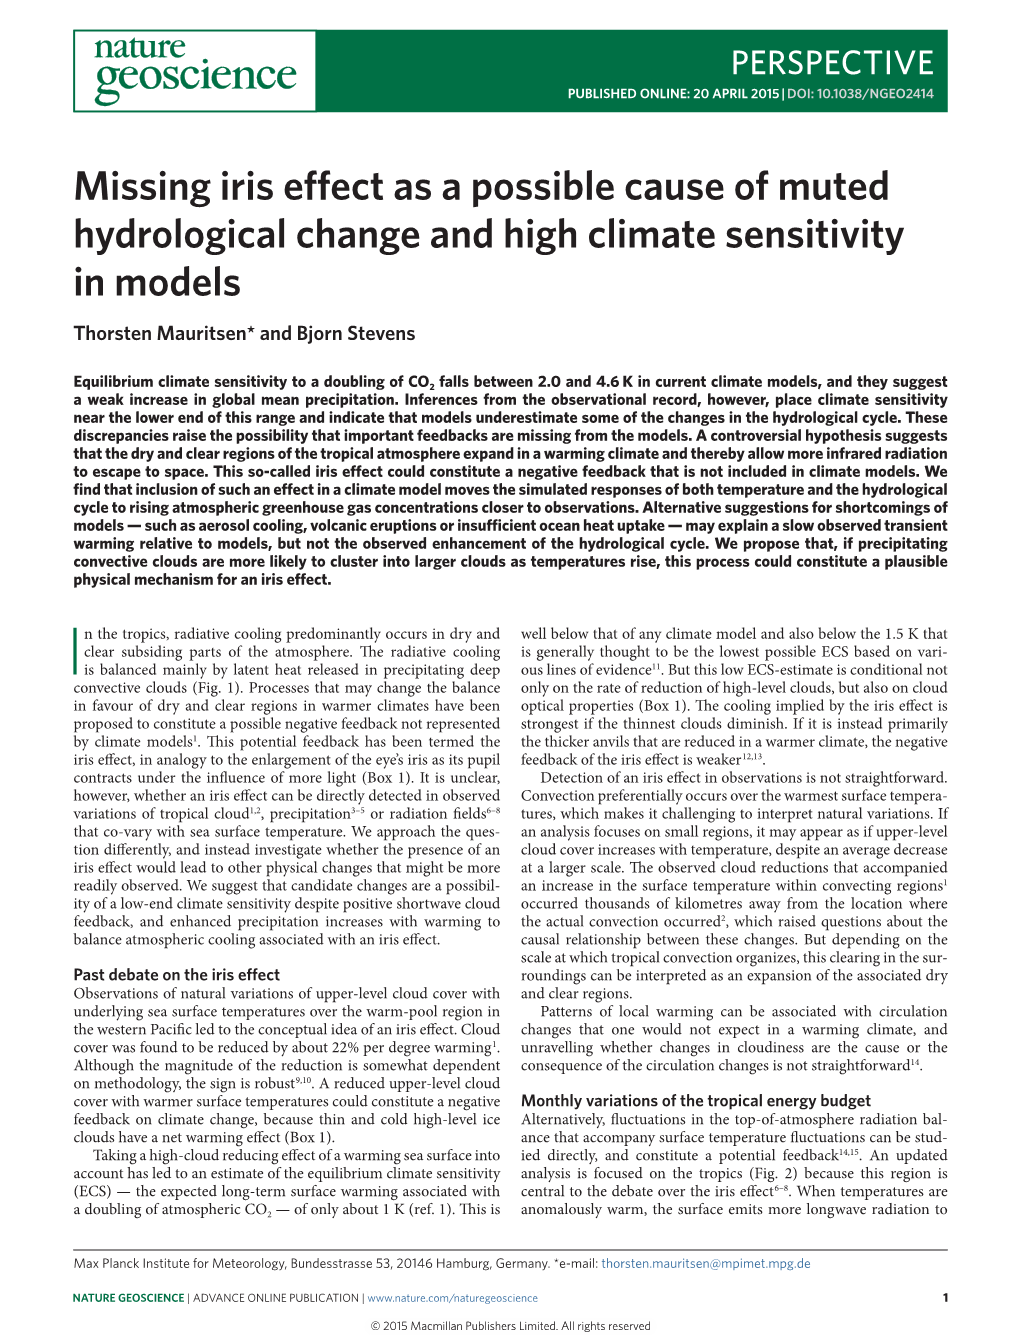 Missing Iris Effect As a Possible Cause of Muted Hydrological Change and High Climate Sensitivity in Models Thorsten Mauritsen* and Bjorn Stevens